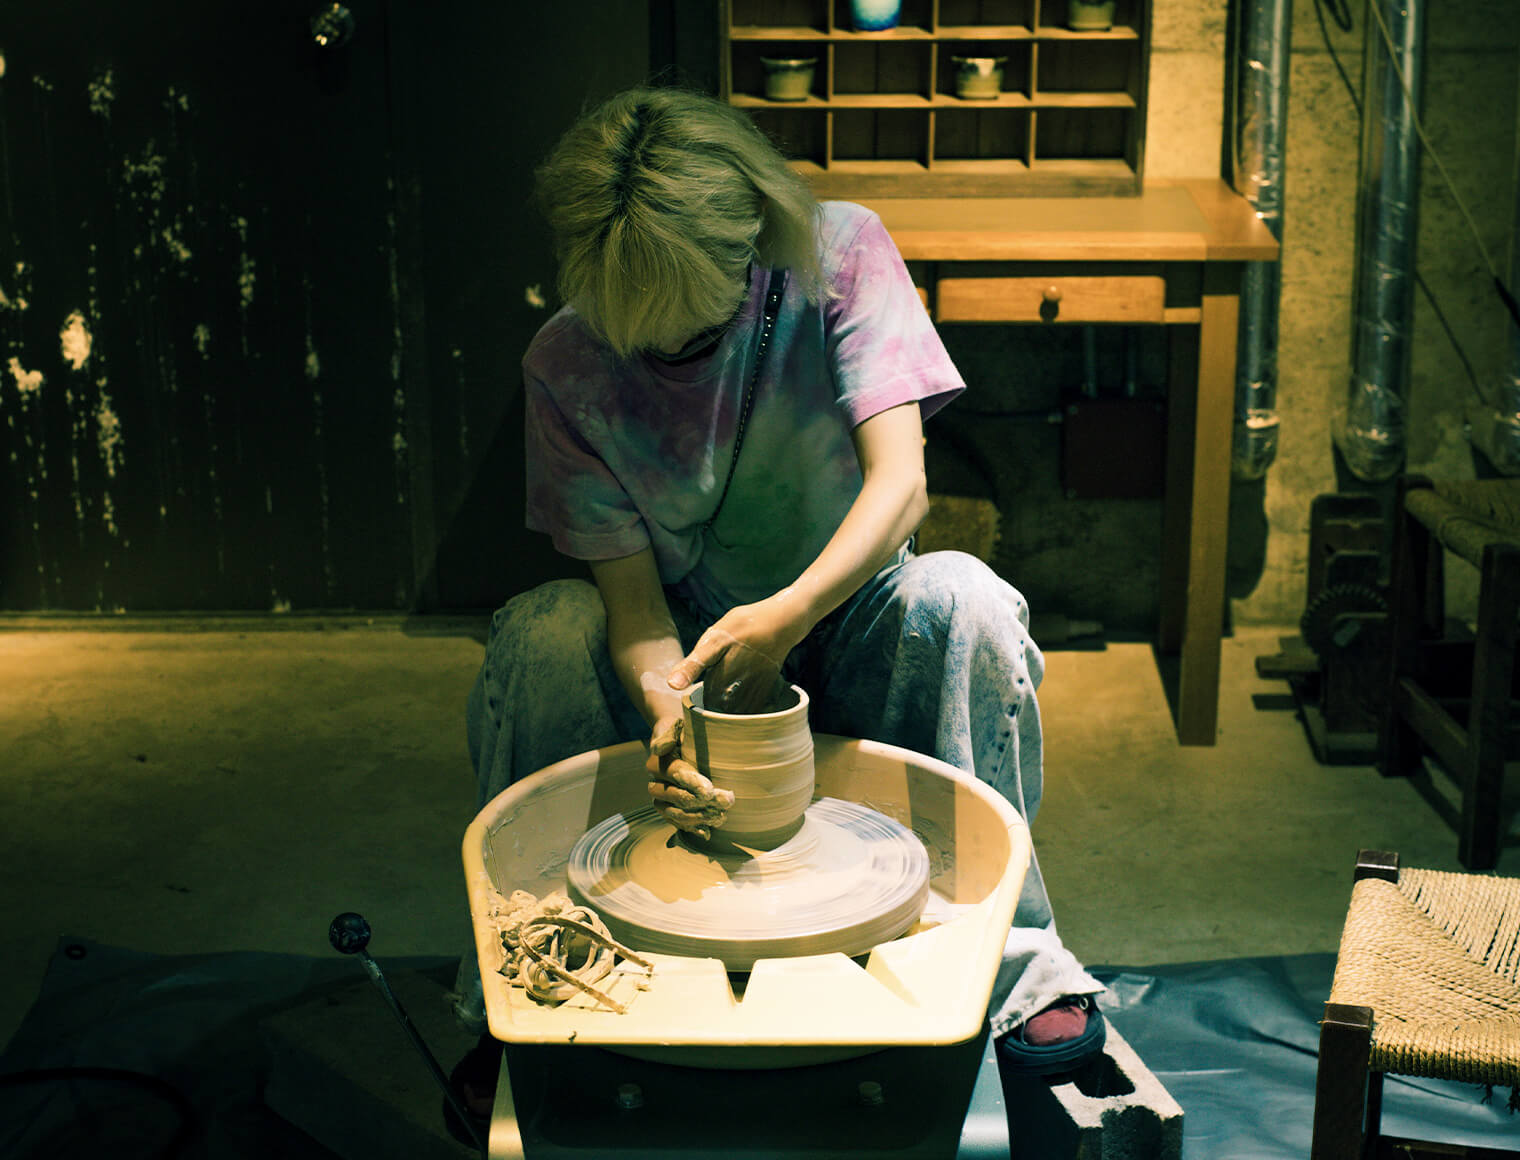 Pottery experience